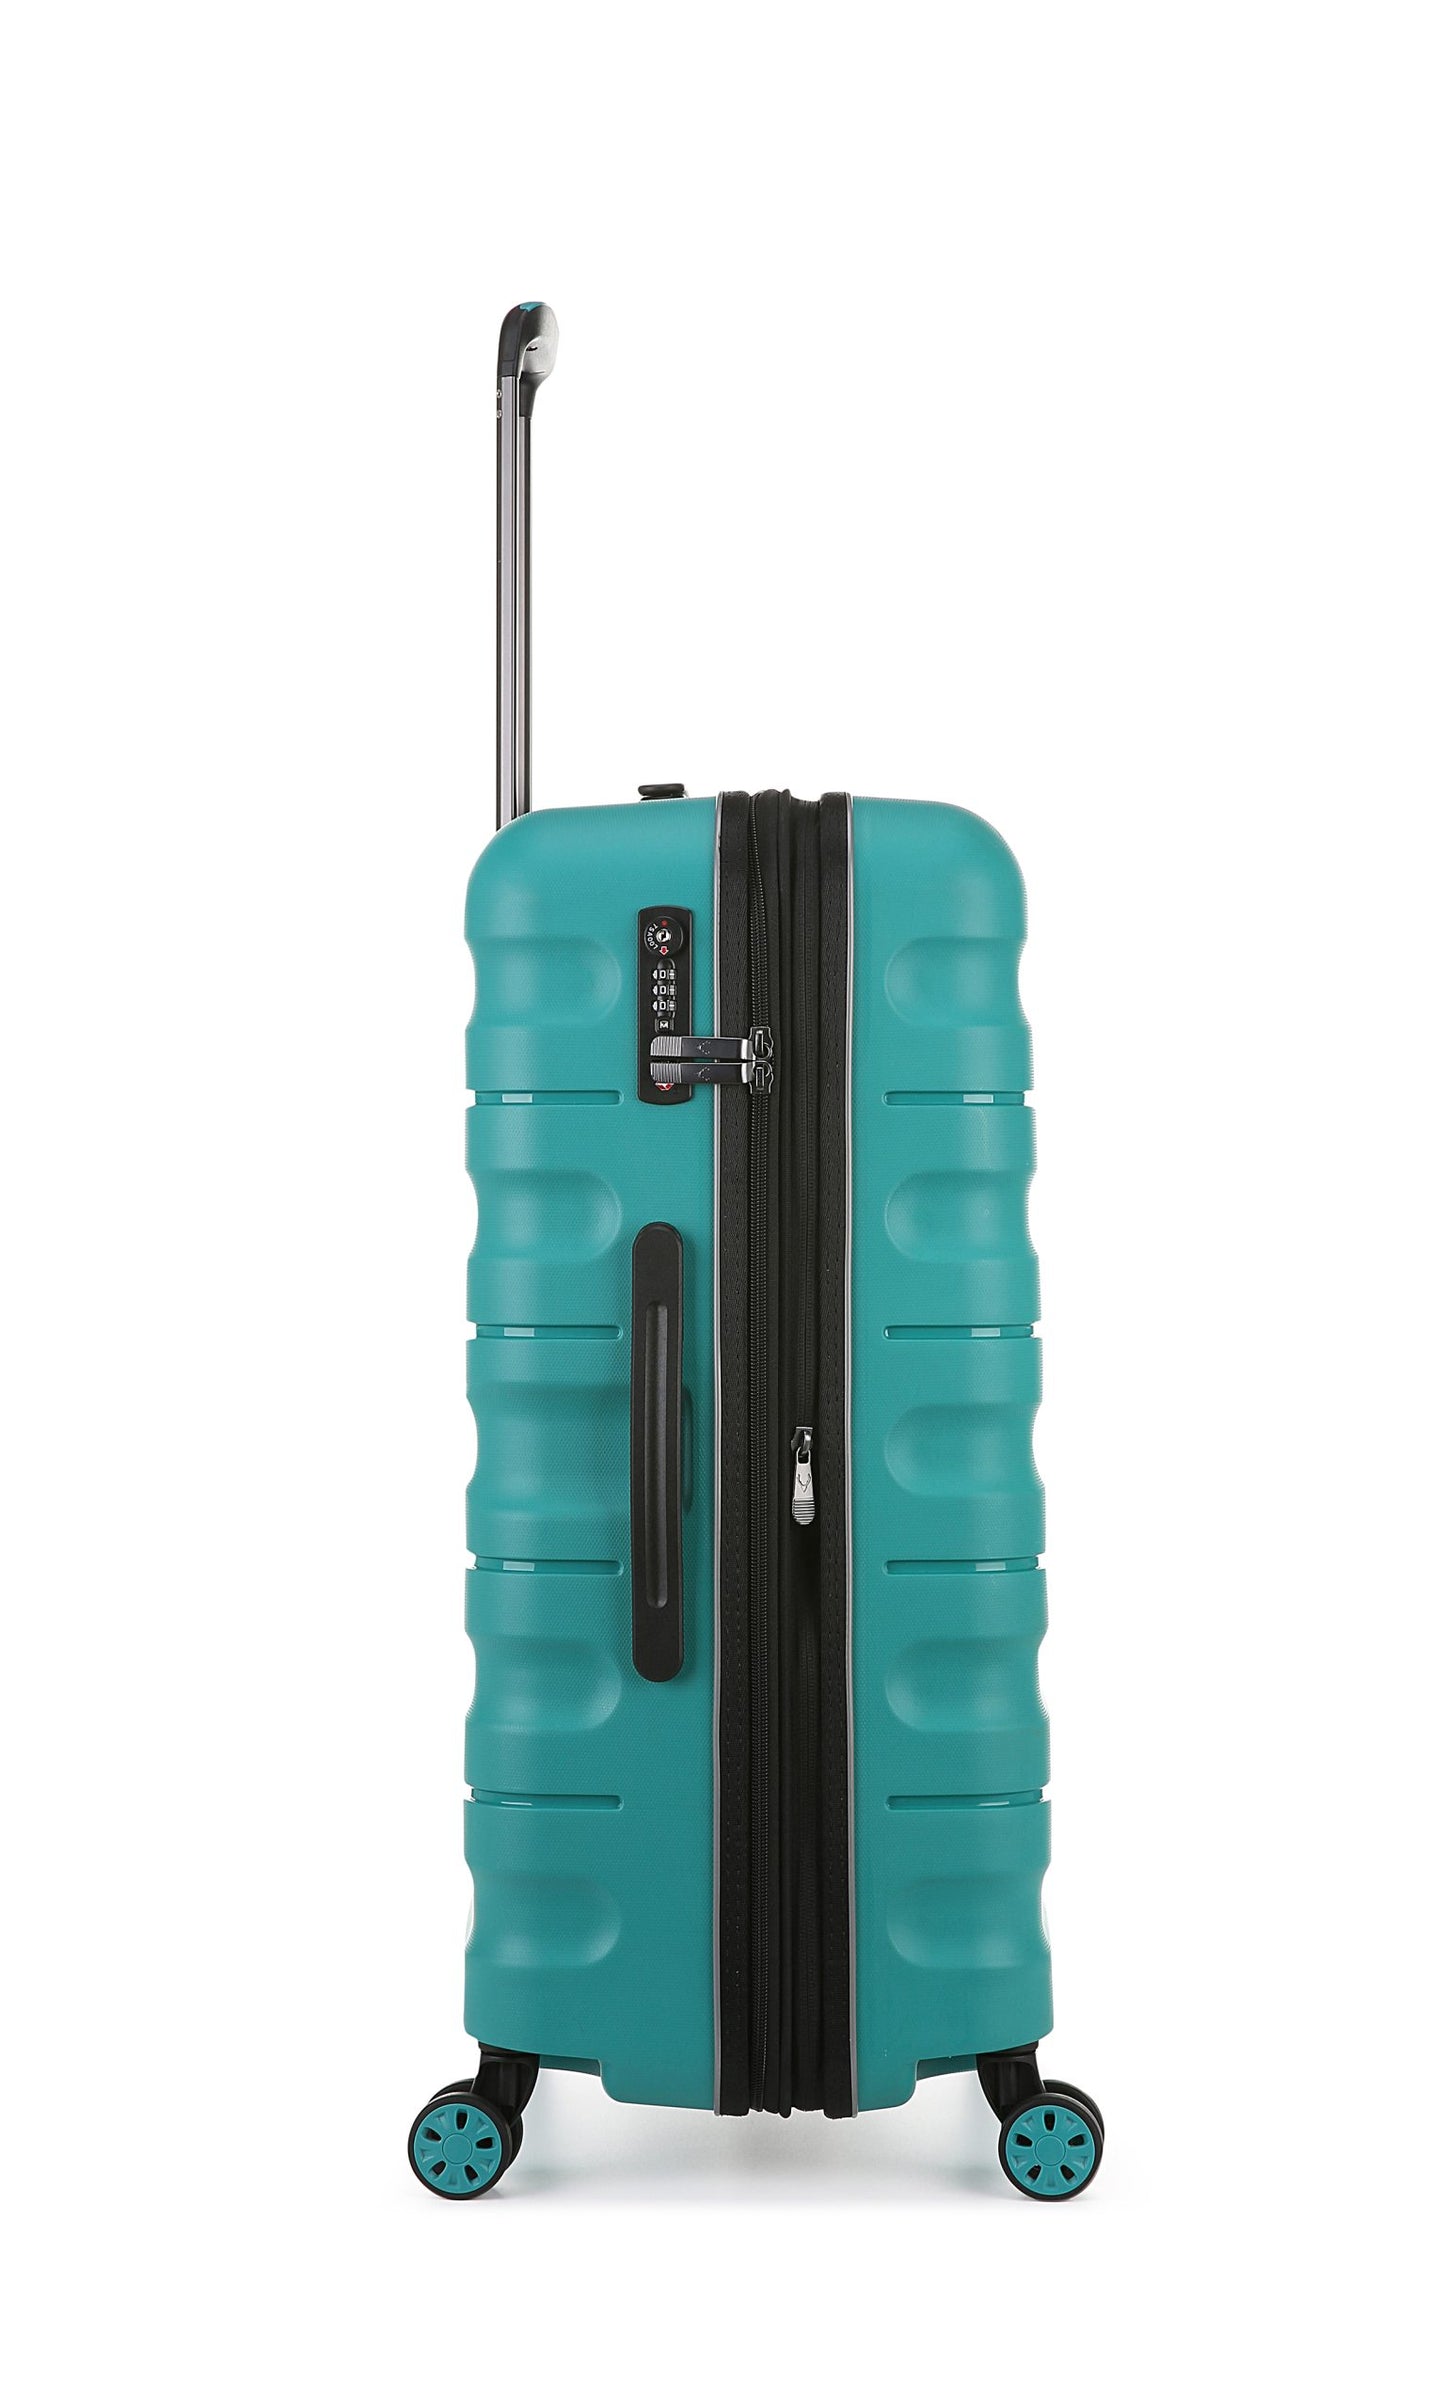 Antler - Lincoln Small 56cm Hardside 4 Wheel Suitcase - Teal